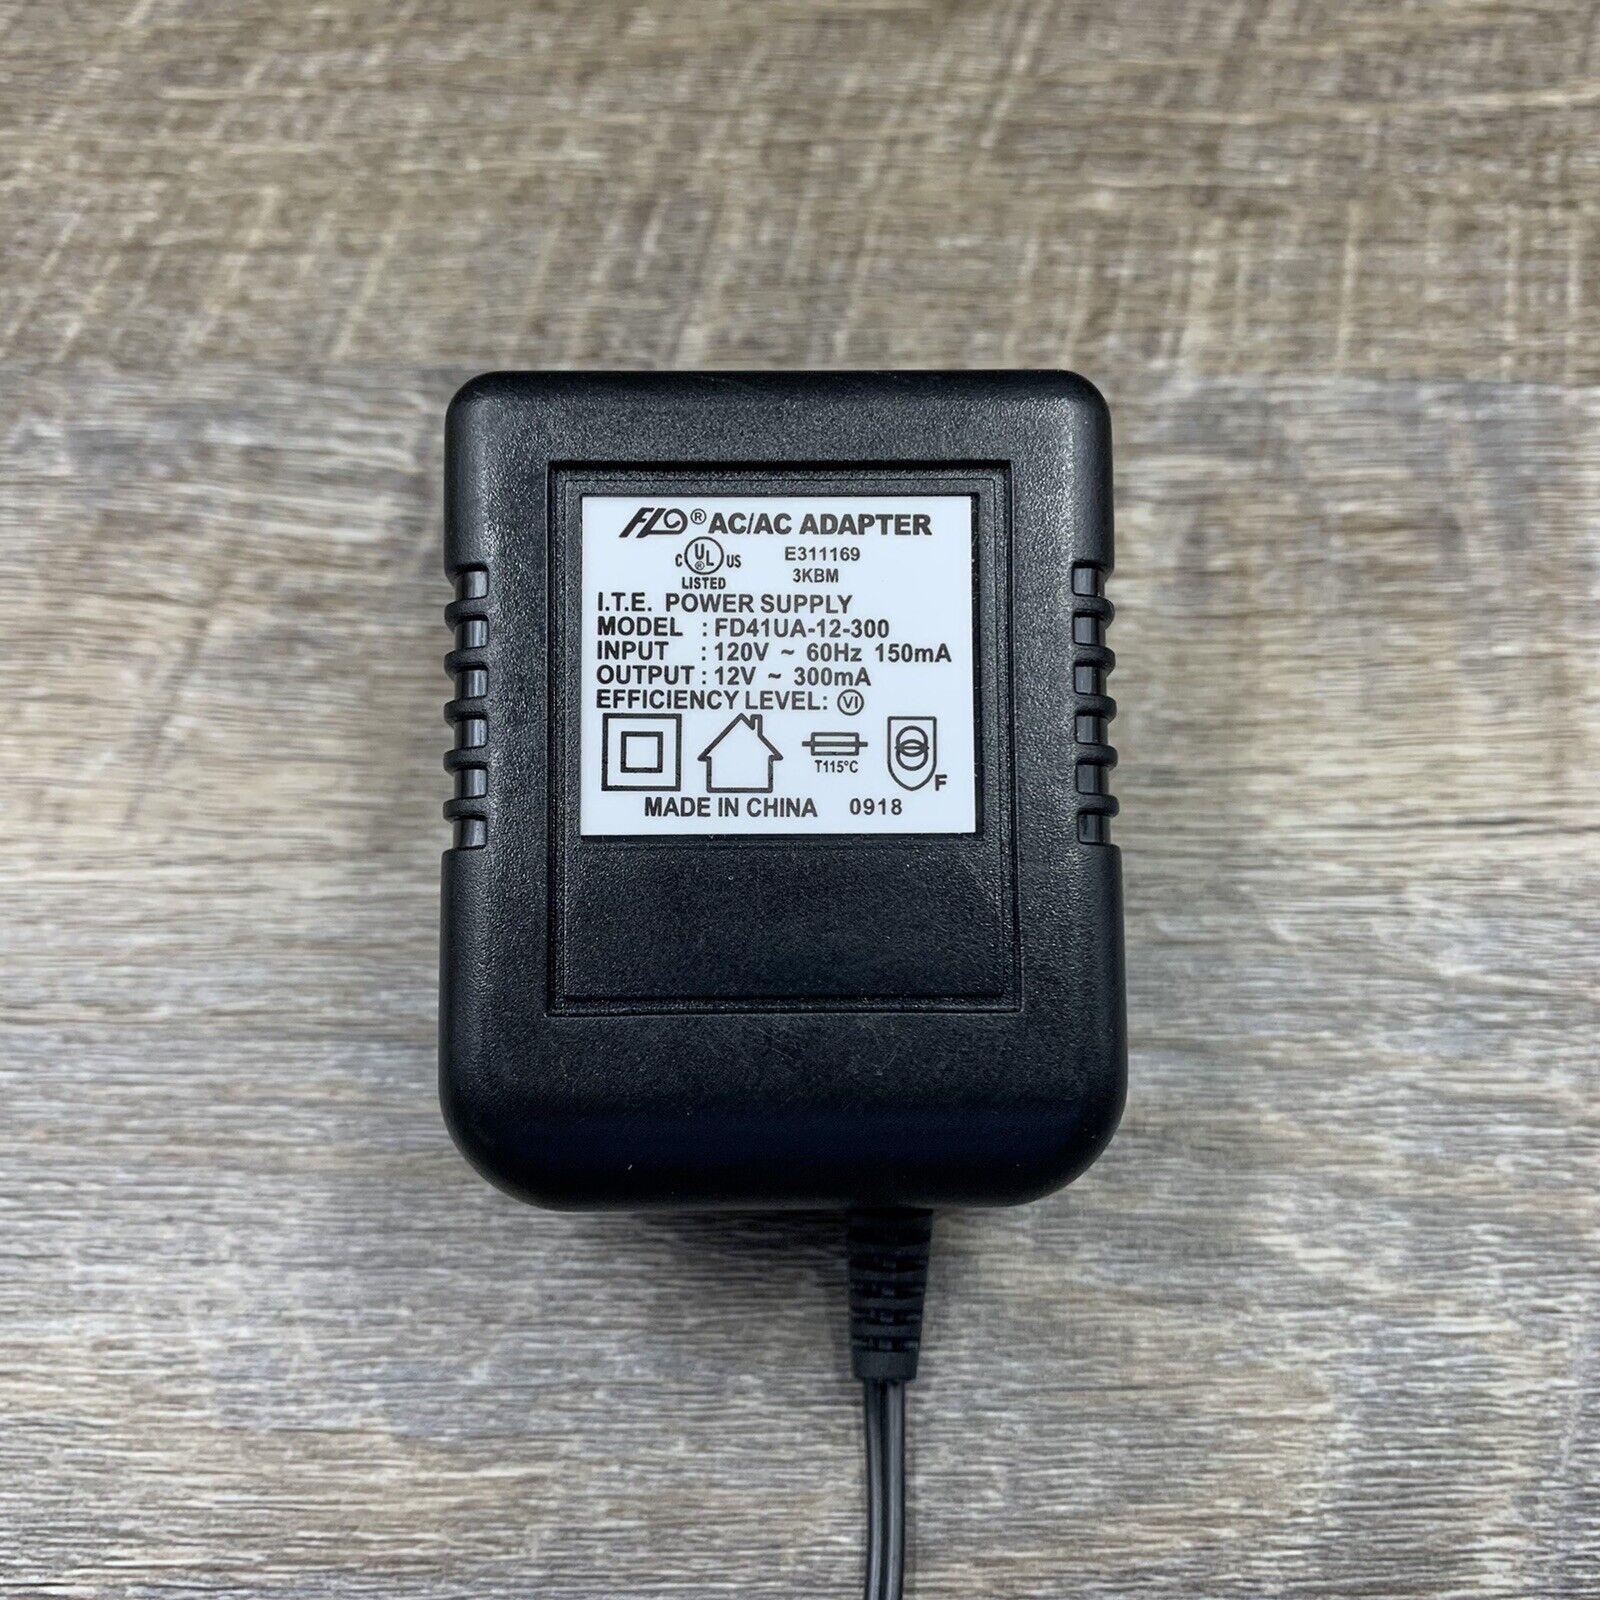 FLO AC Adapter Model FD41UA-12-300 12V 300mA Power Supply Charger Brand: FLO Type: AC/AC Adapter Connection Split/Du